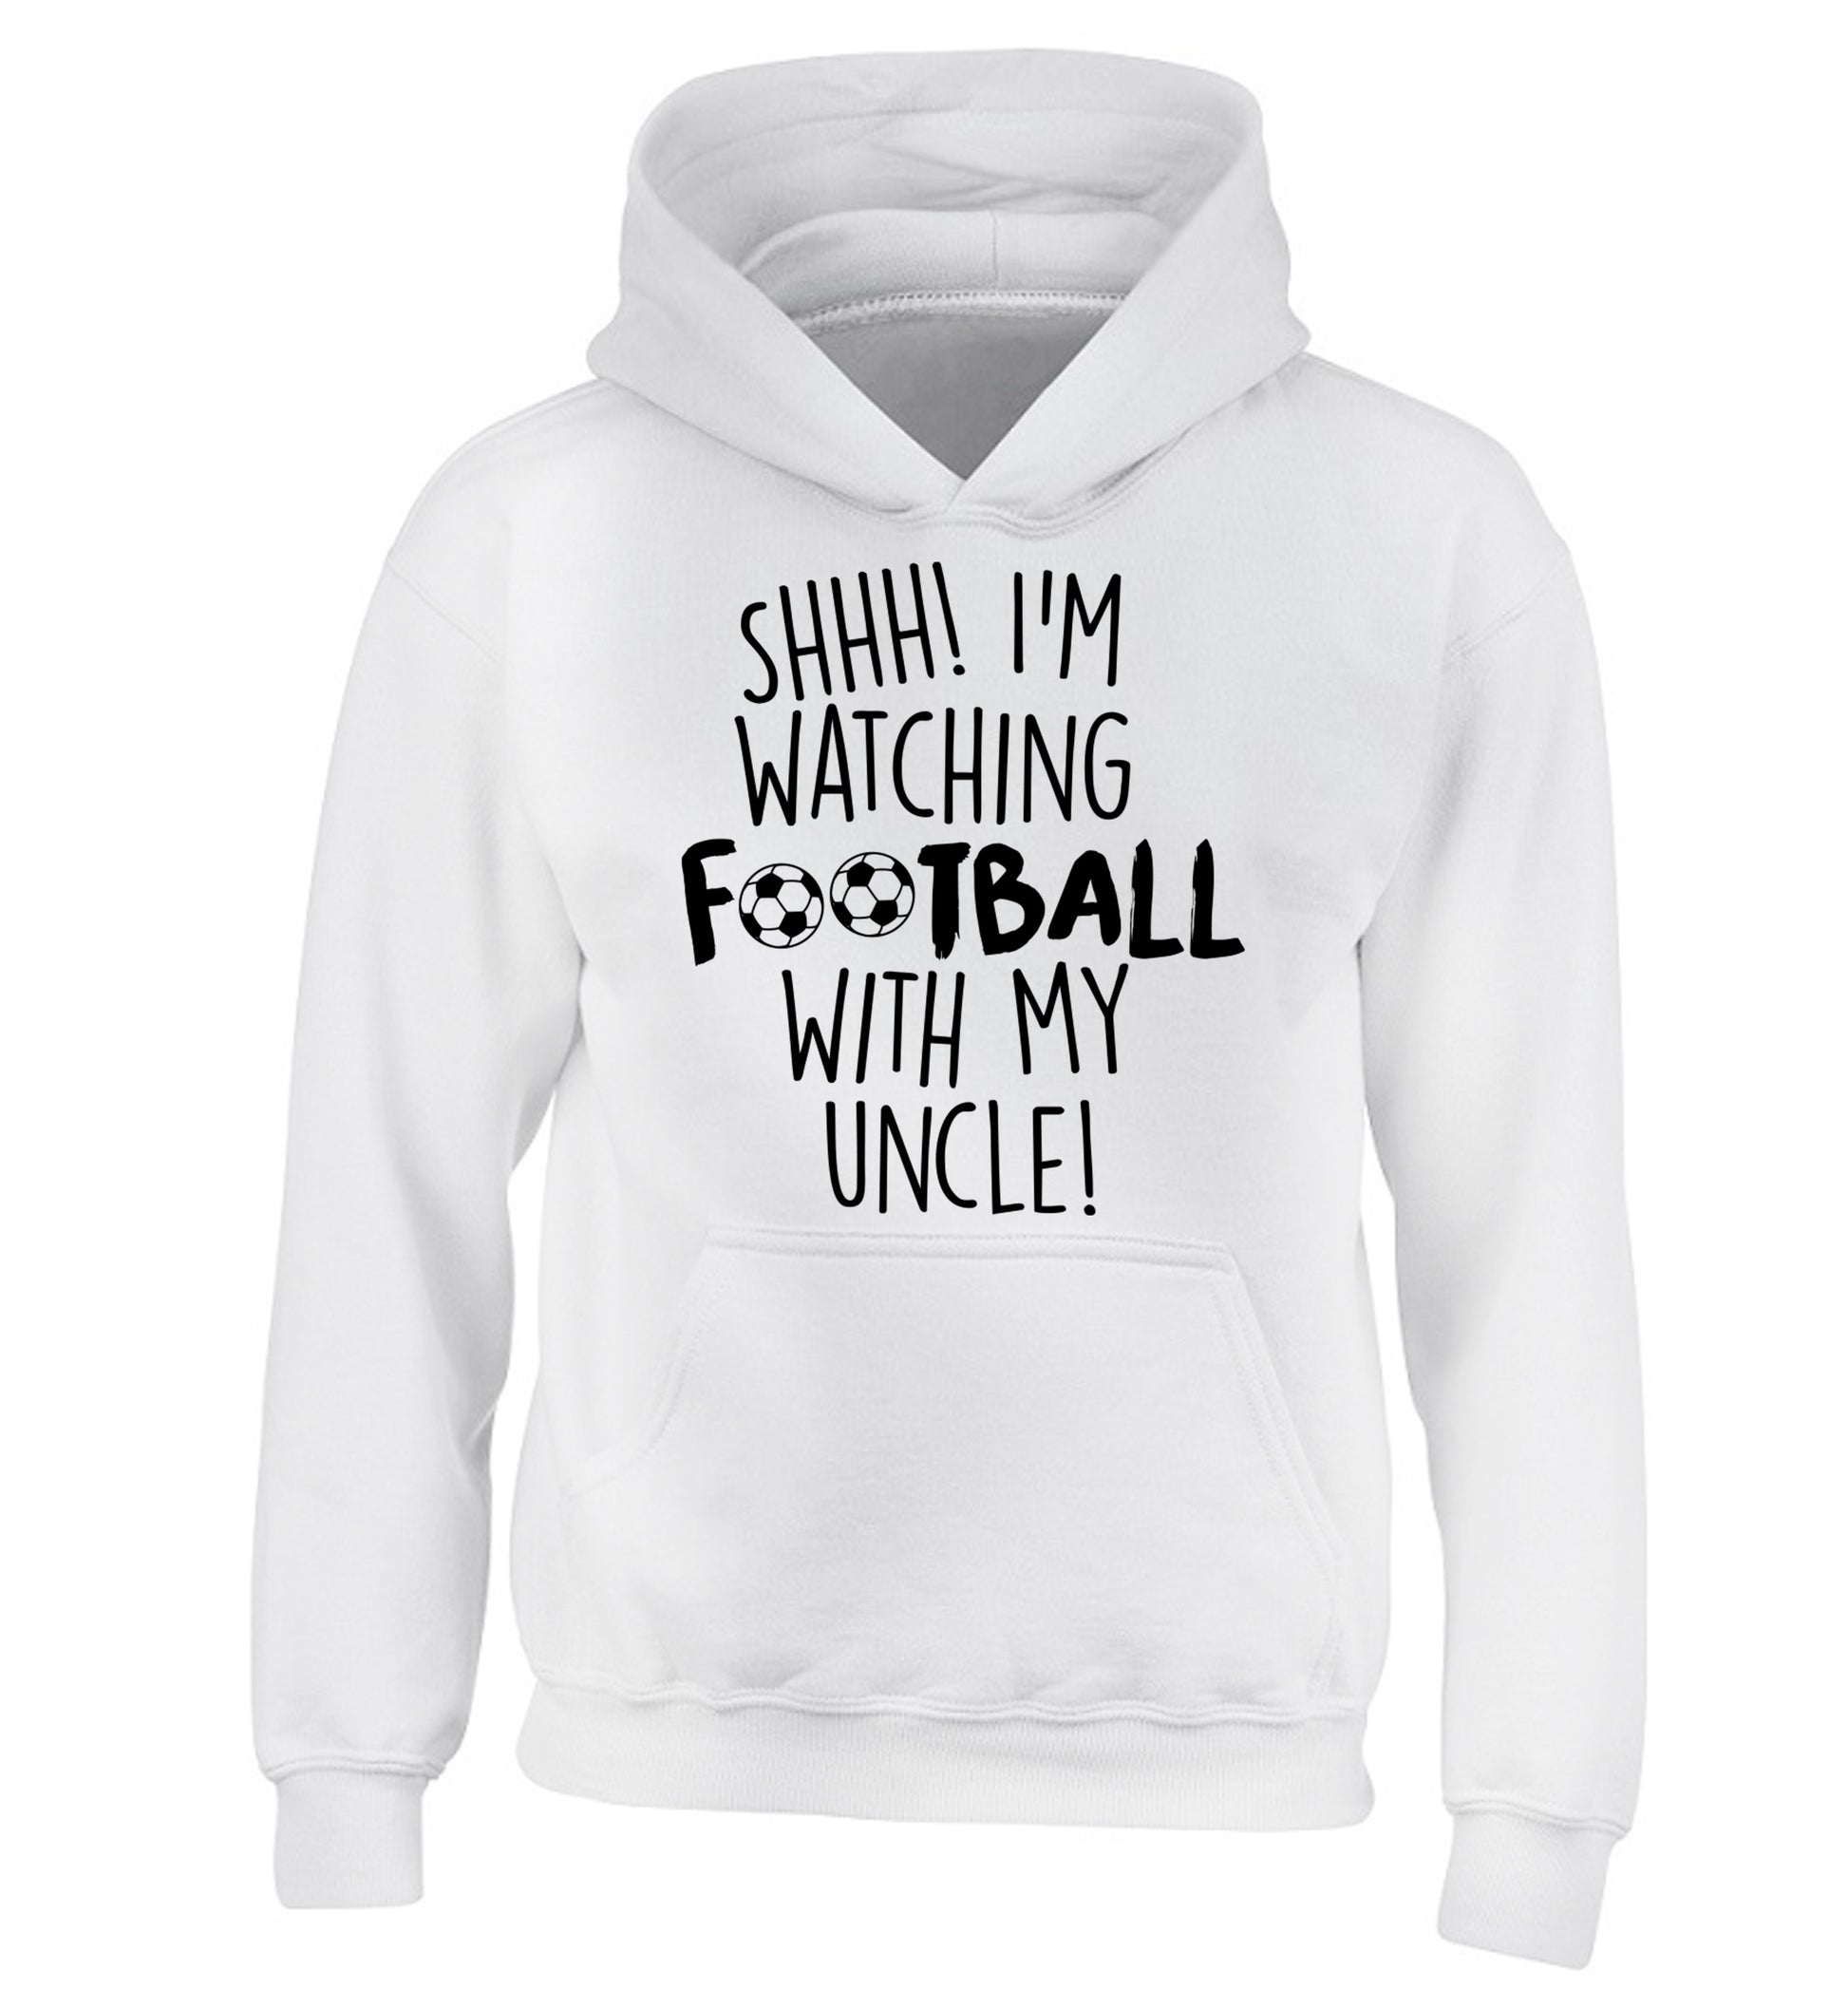 Shhh I'm watching football with my uncle children's white hoodie 12-14 Years